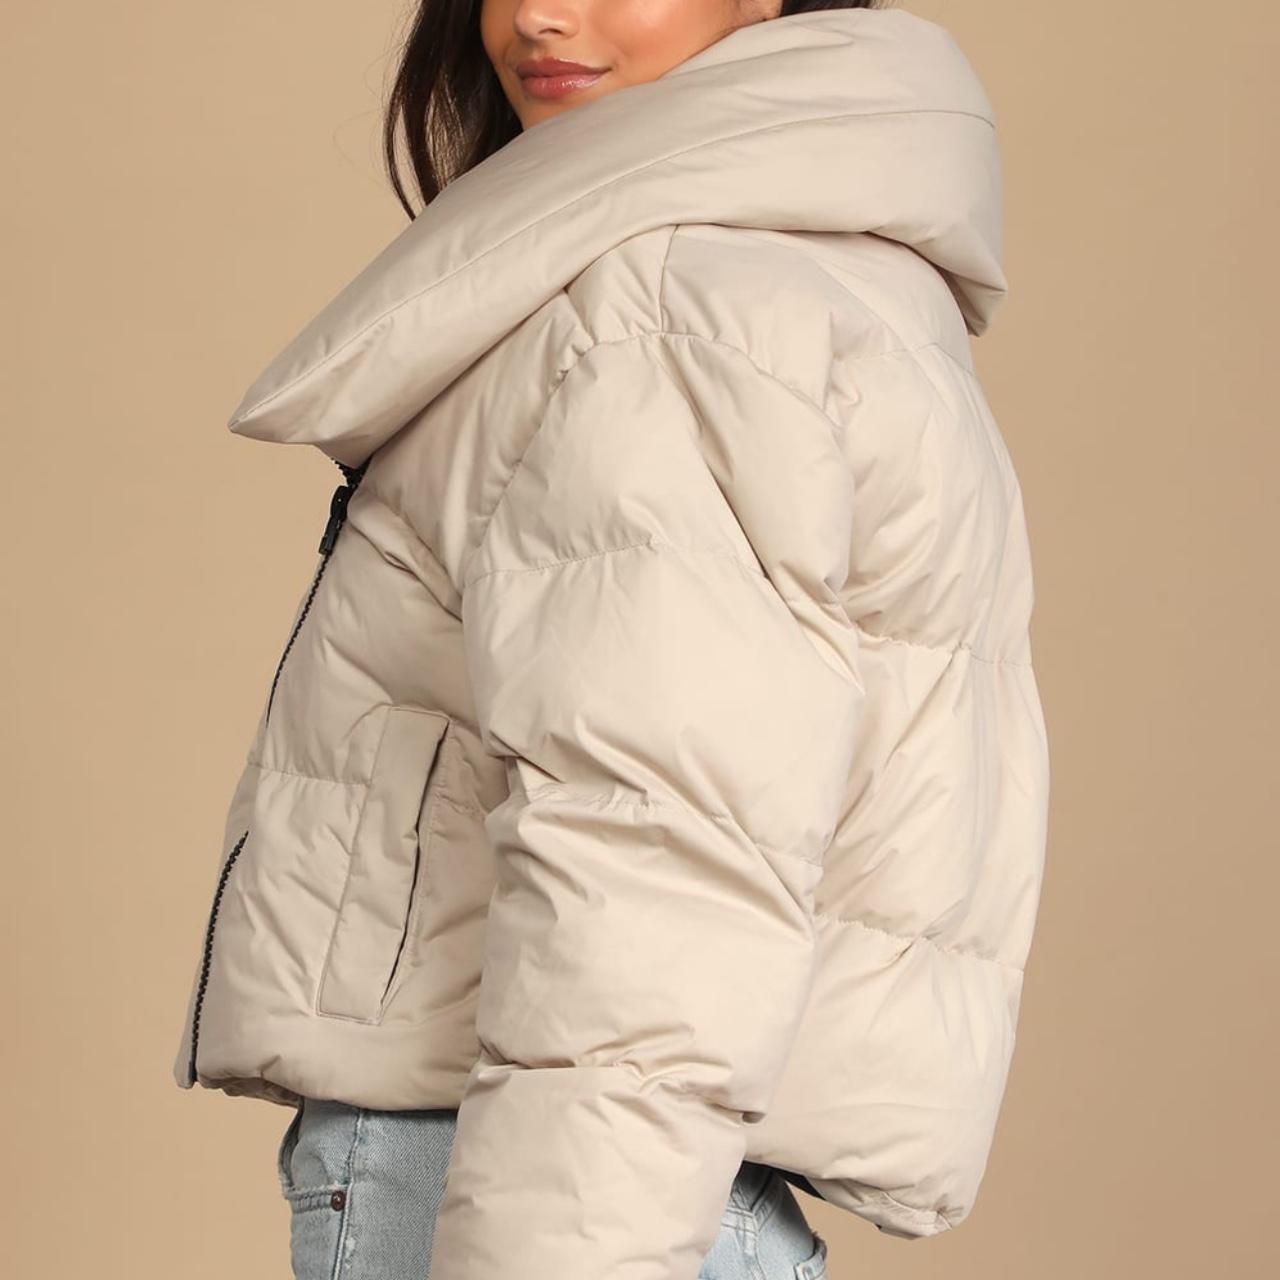 Winter Dreams Beige Quilted Cropped Puffer Jacket